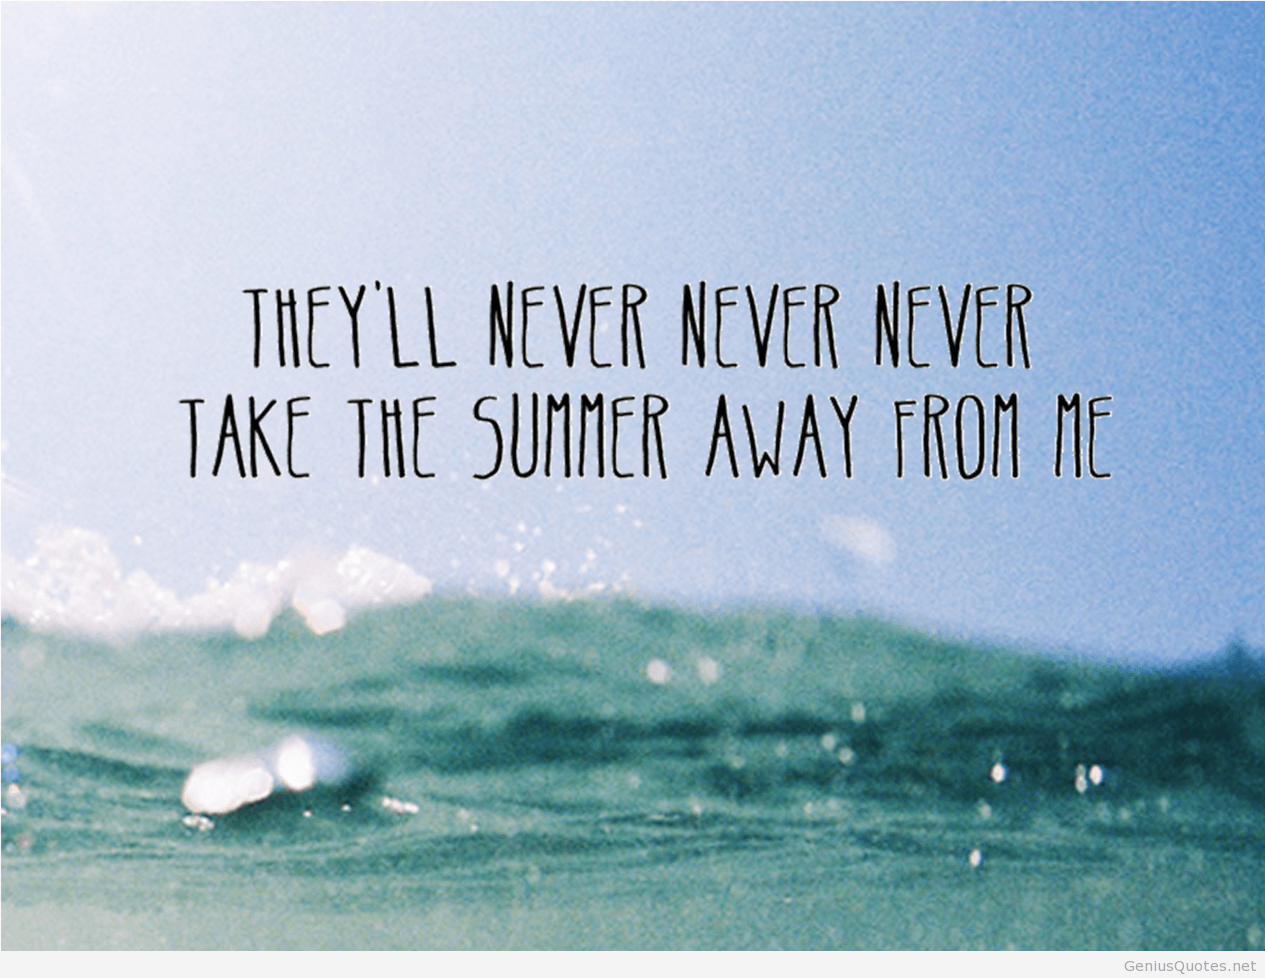 summer quotes wallpapers